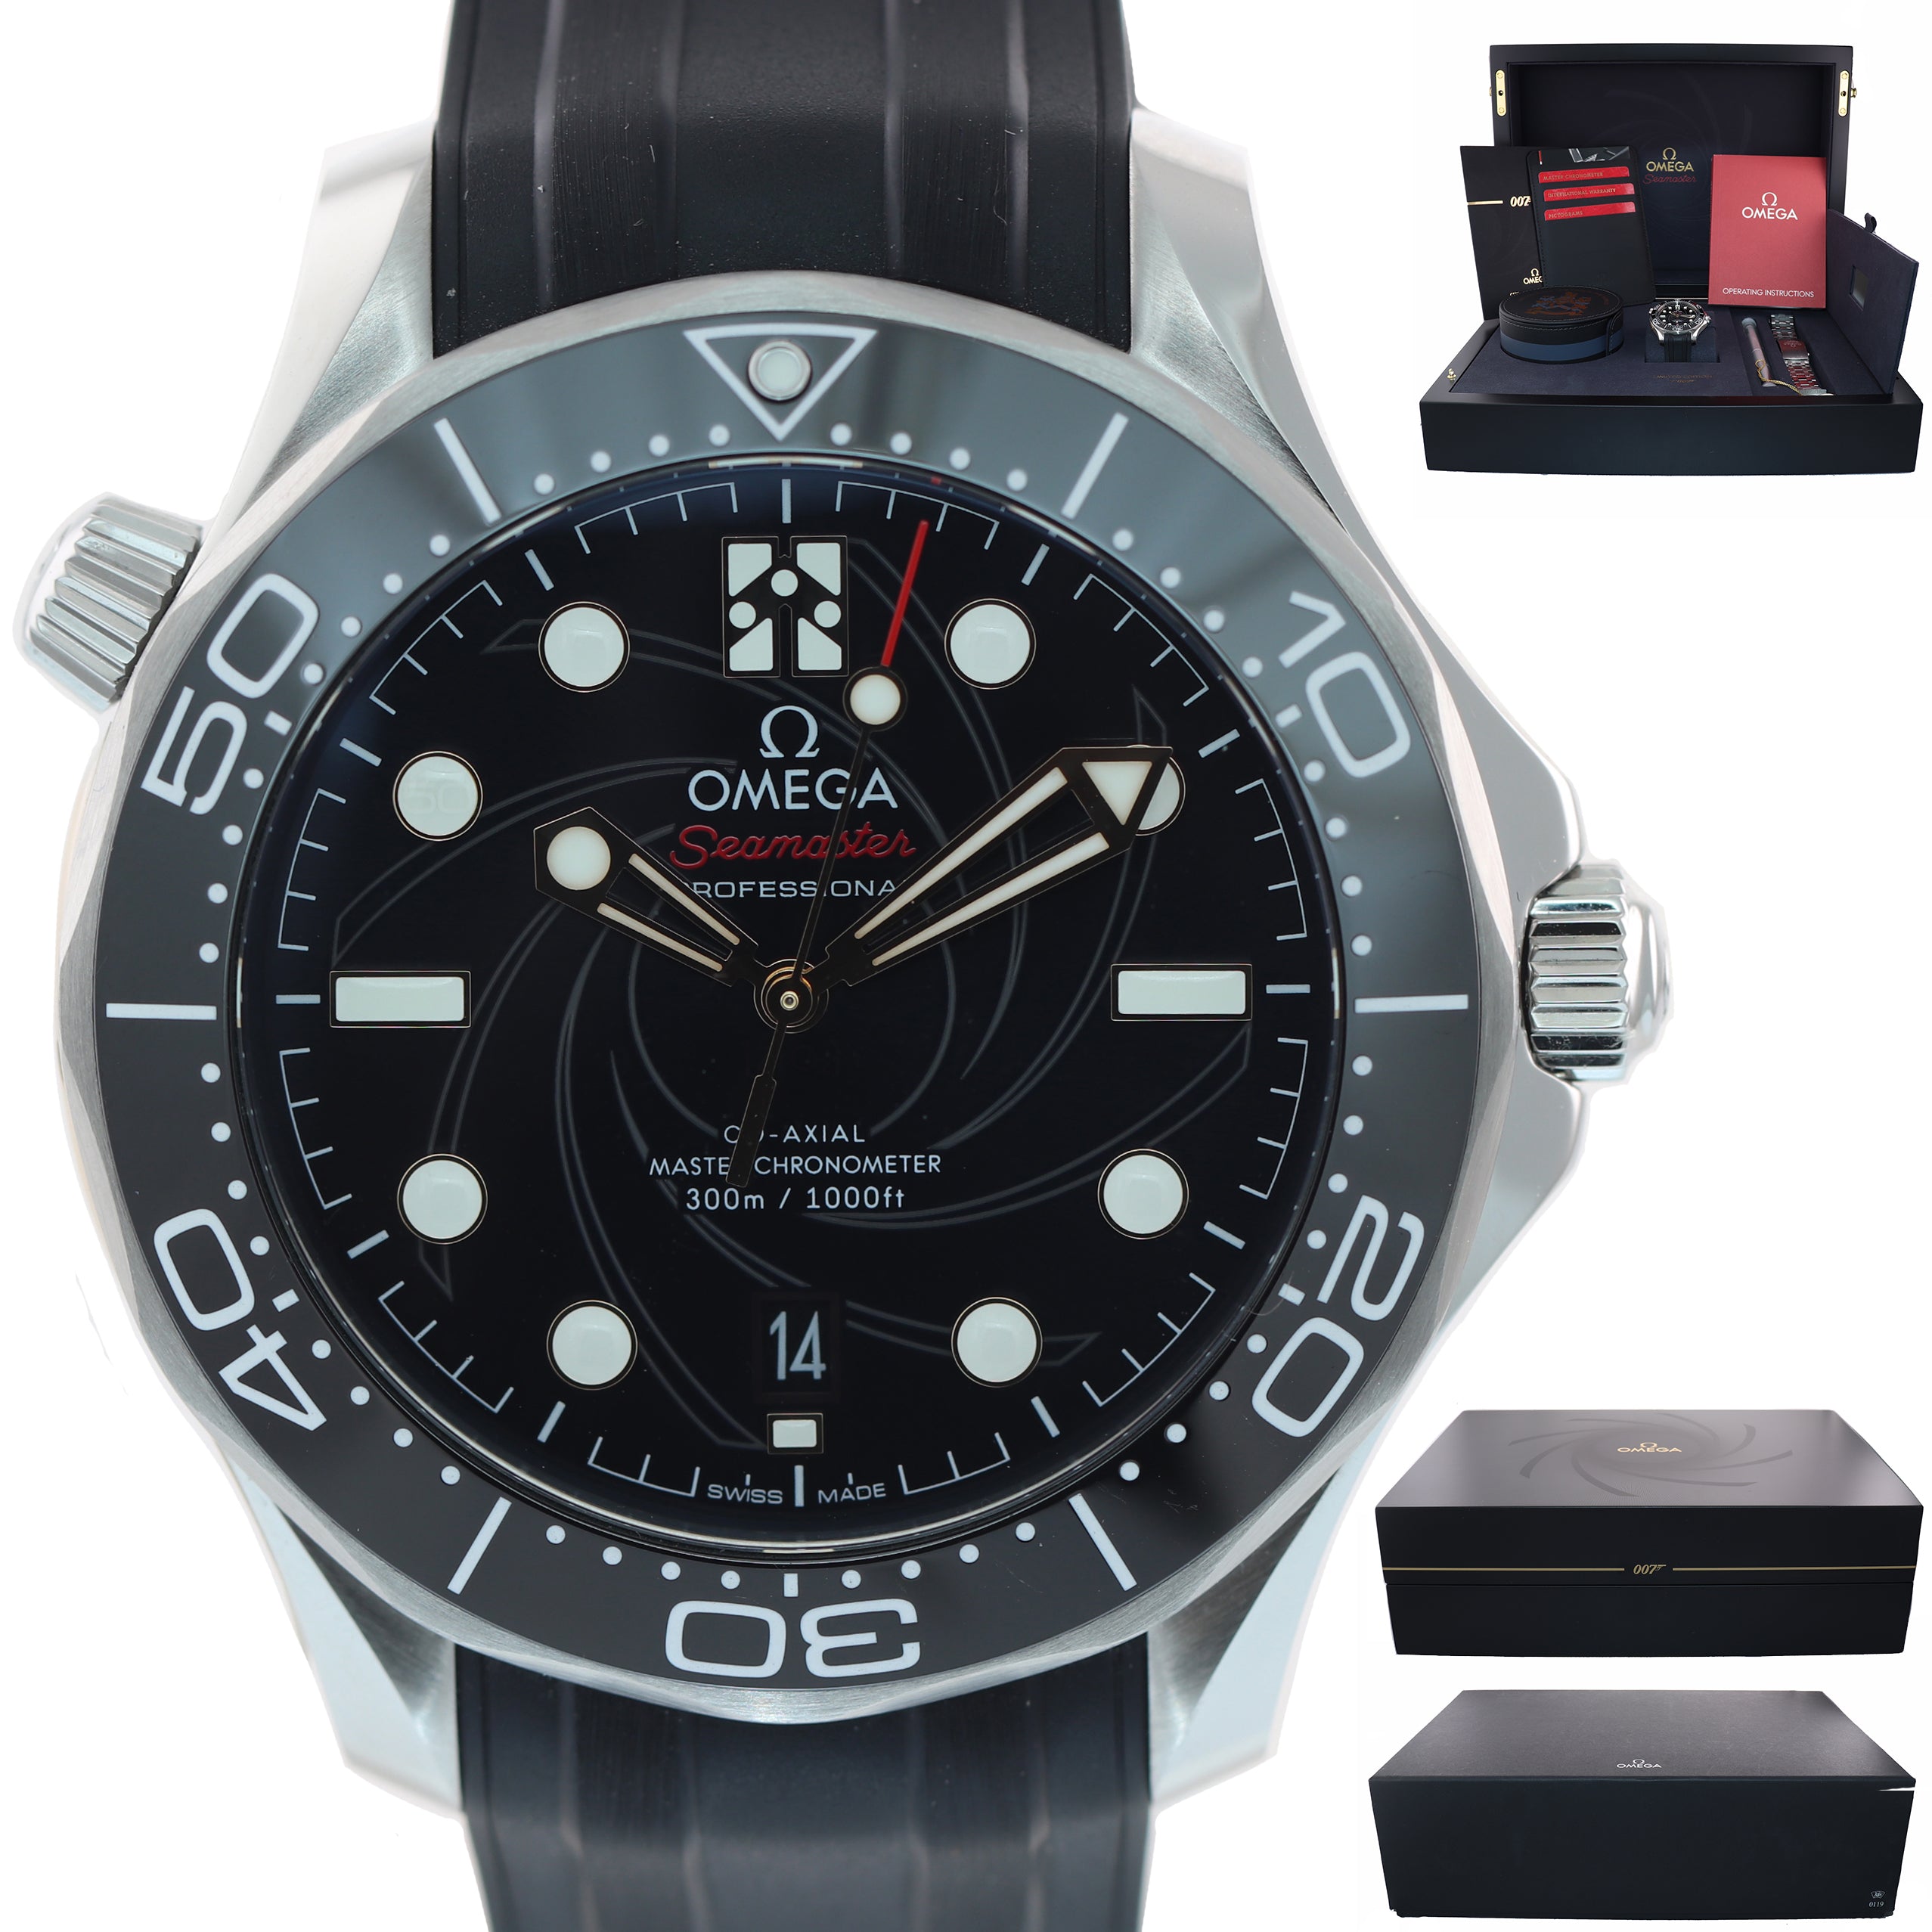 PAPERS NEW Omega Seamaster 300M 007 James Bond 210.22.42.20.01.004 Watch Box